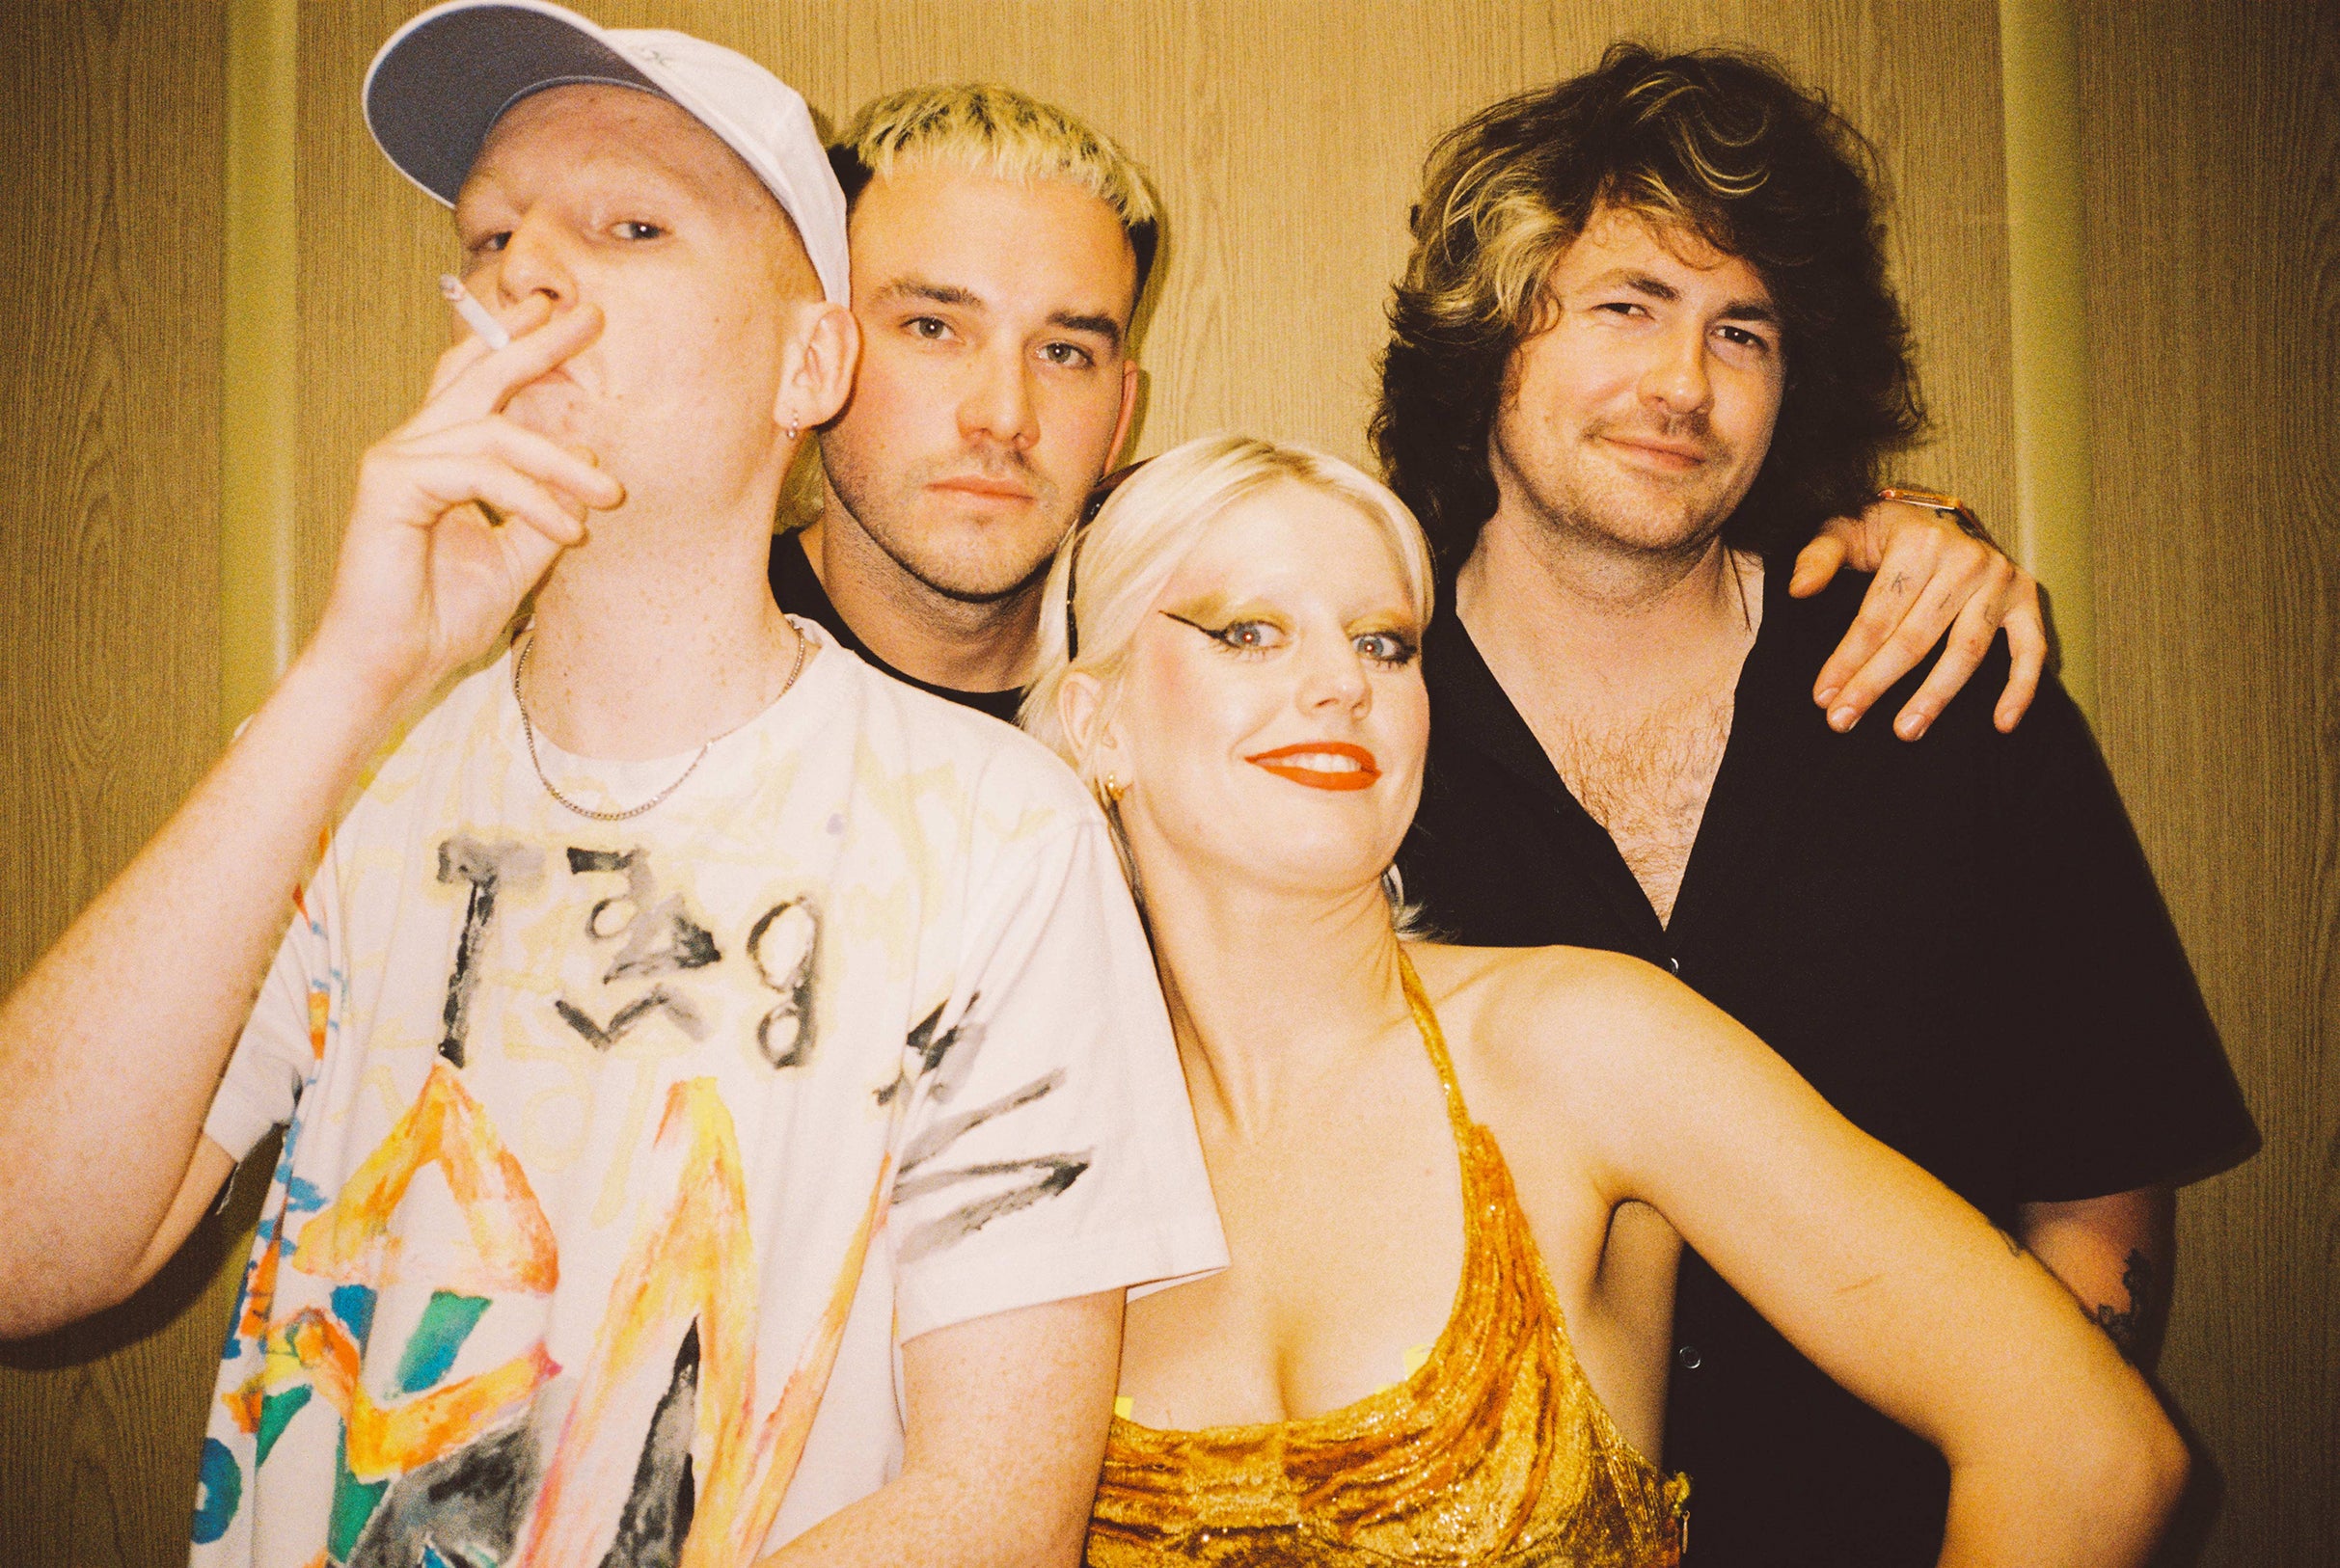 Amyl and the Sniffers in Del Mar promo photo for Venue / Promoter presale offer code